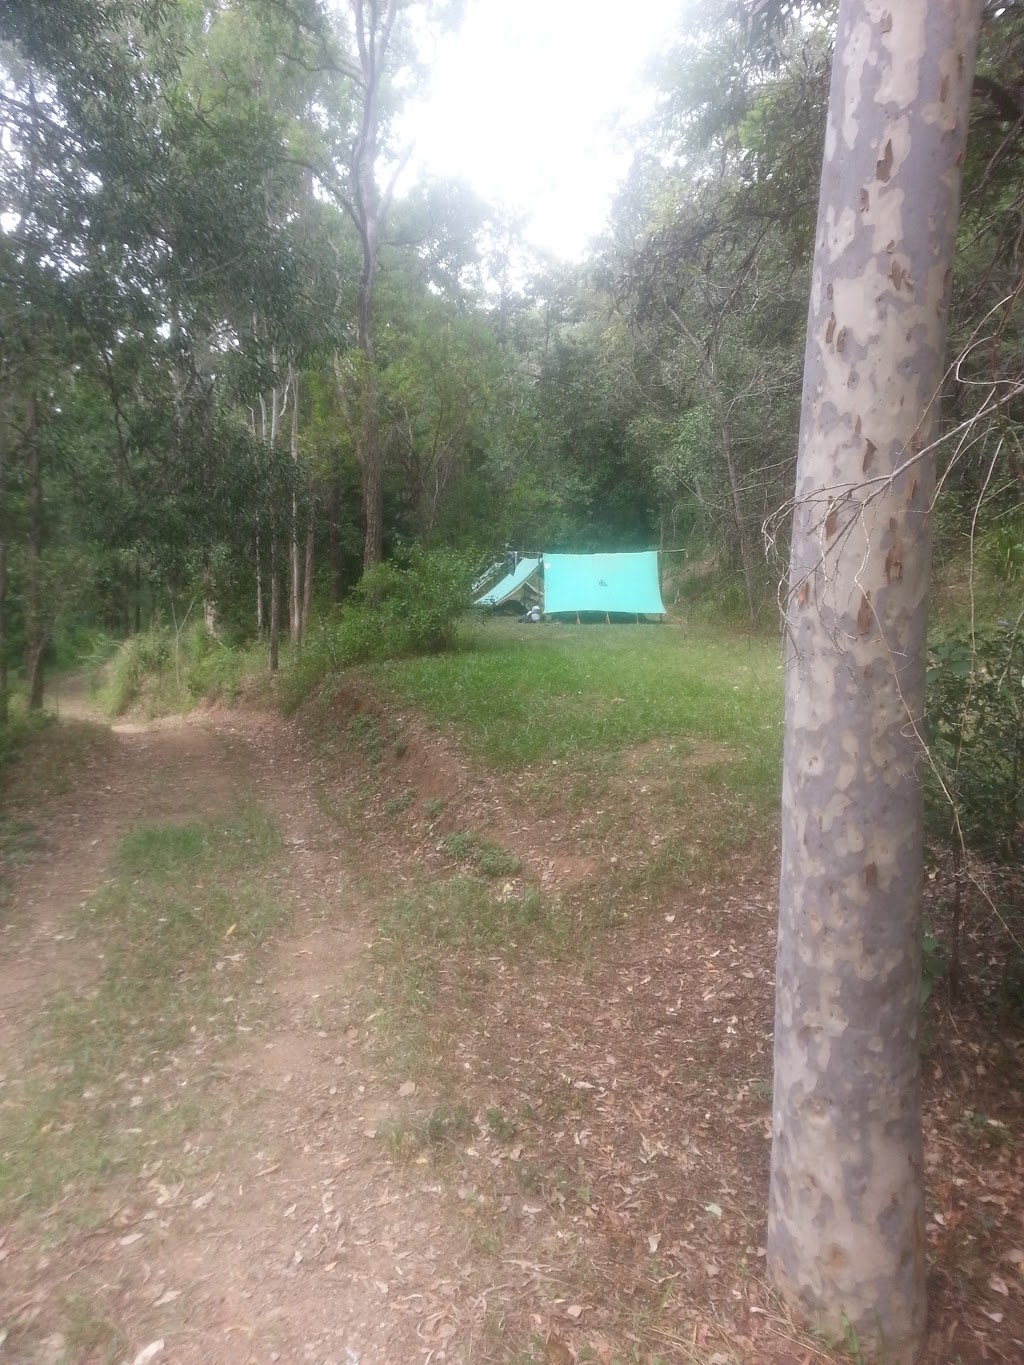 Tyamolum Scout Campsite | campground | 31 Bunya St, Mount Crosby QLD 4306, Australia | 0404301603 OR +61 404 301 603